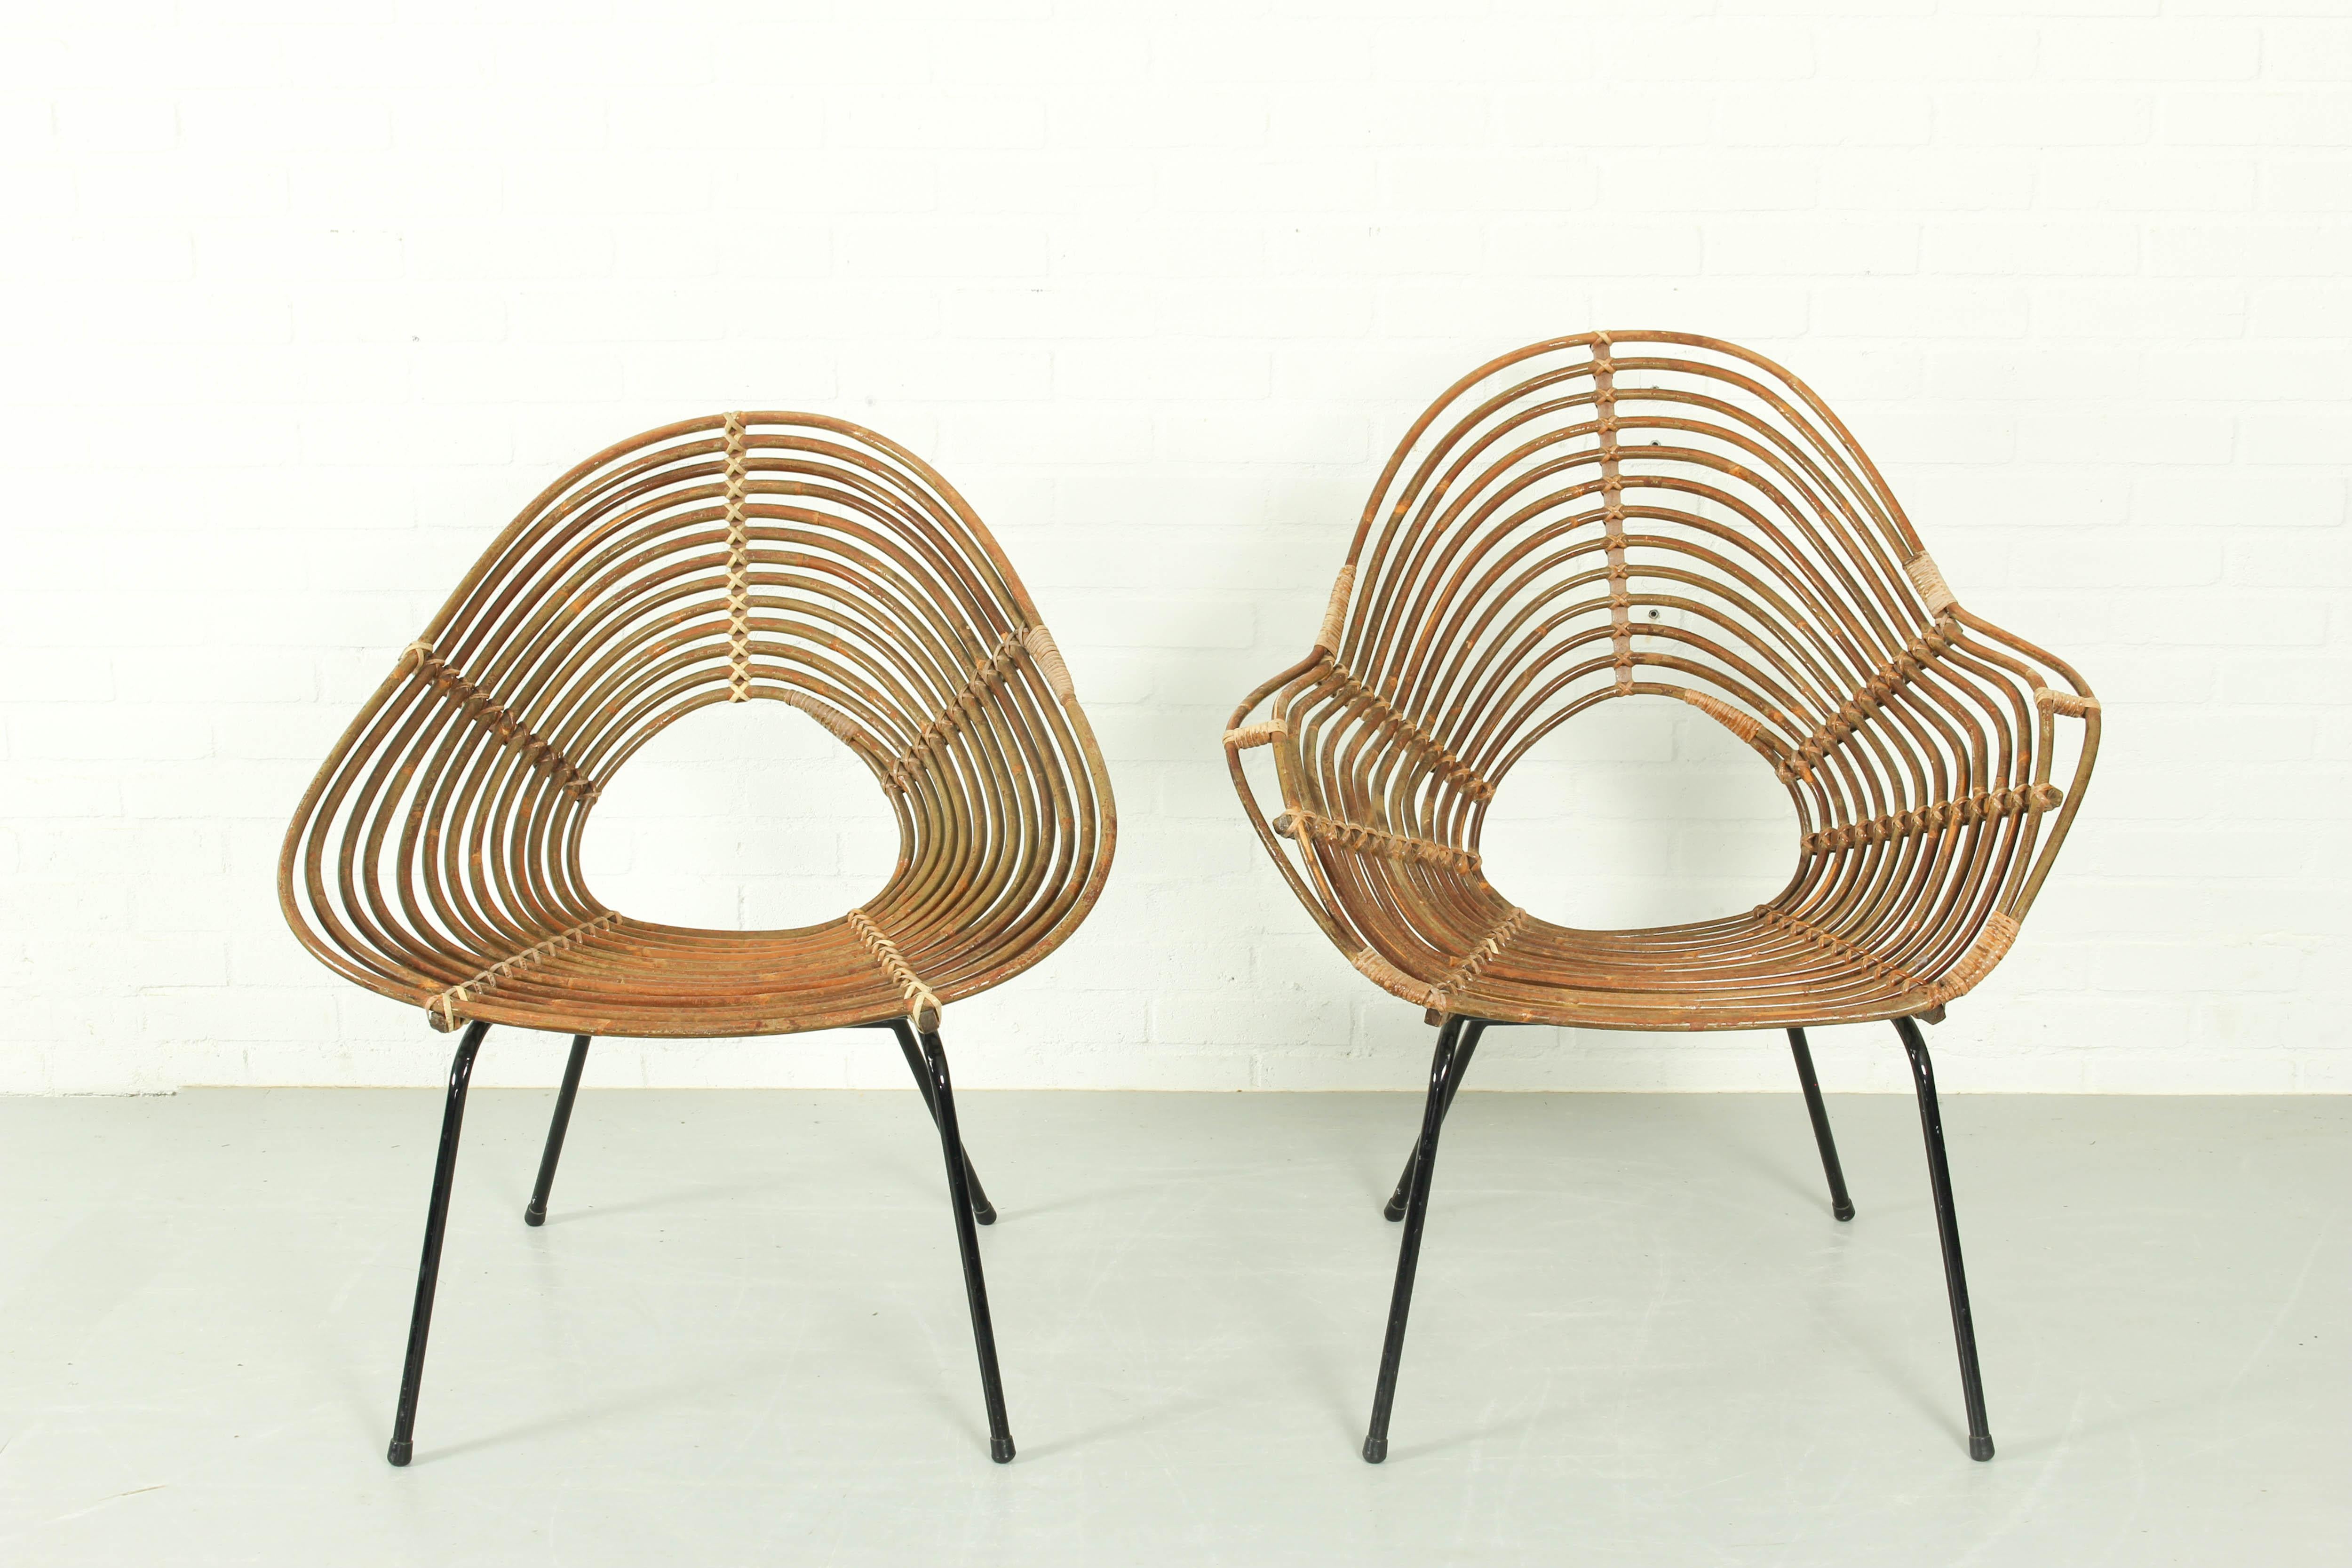 Set of 2 Rare Rattan Chairs designed by H. Broekhuizen for Rohe Noordwolde in the 1960s. Although these rattan chair look simple, it takes real craftsmanship to make them. In Noordwolde they have been working with rattan since 1825. The two